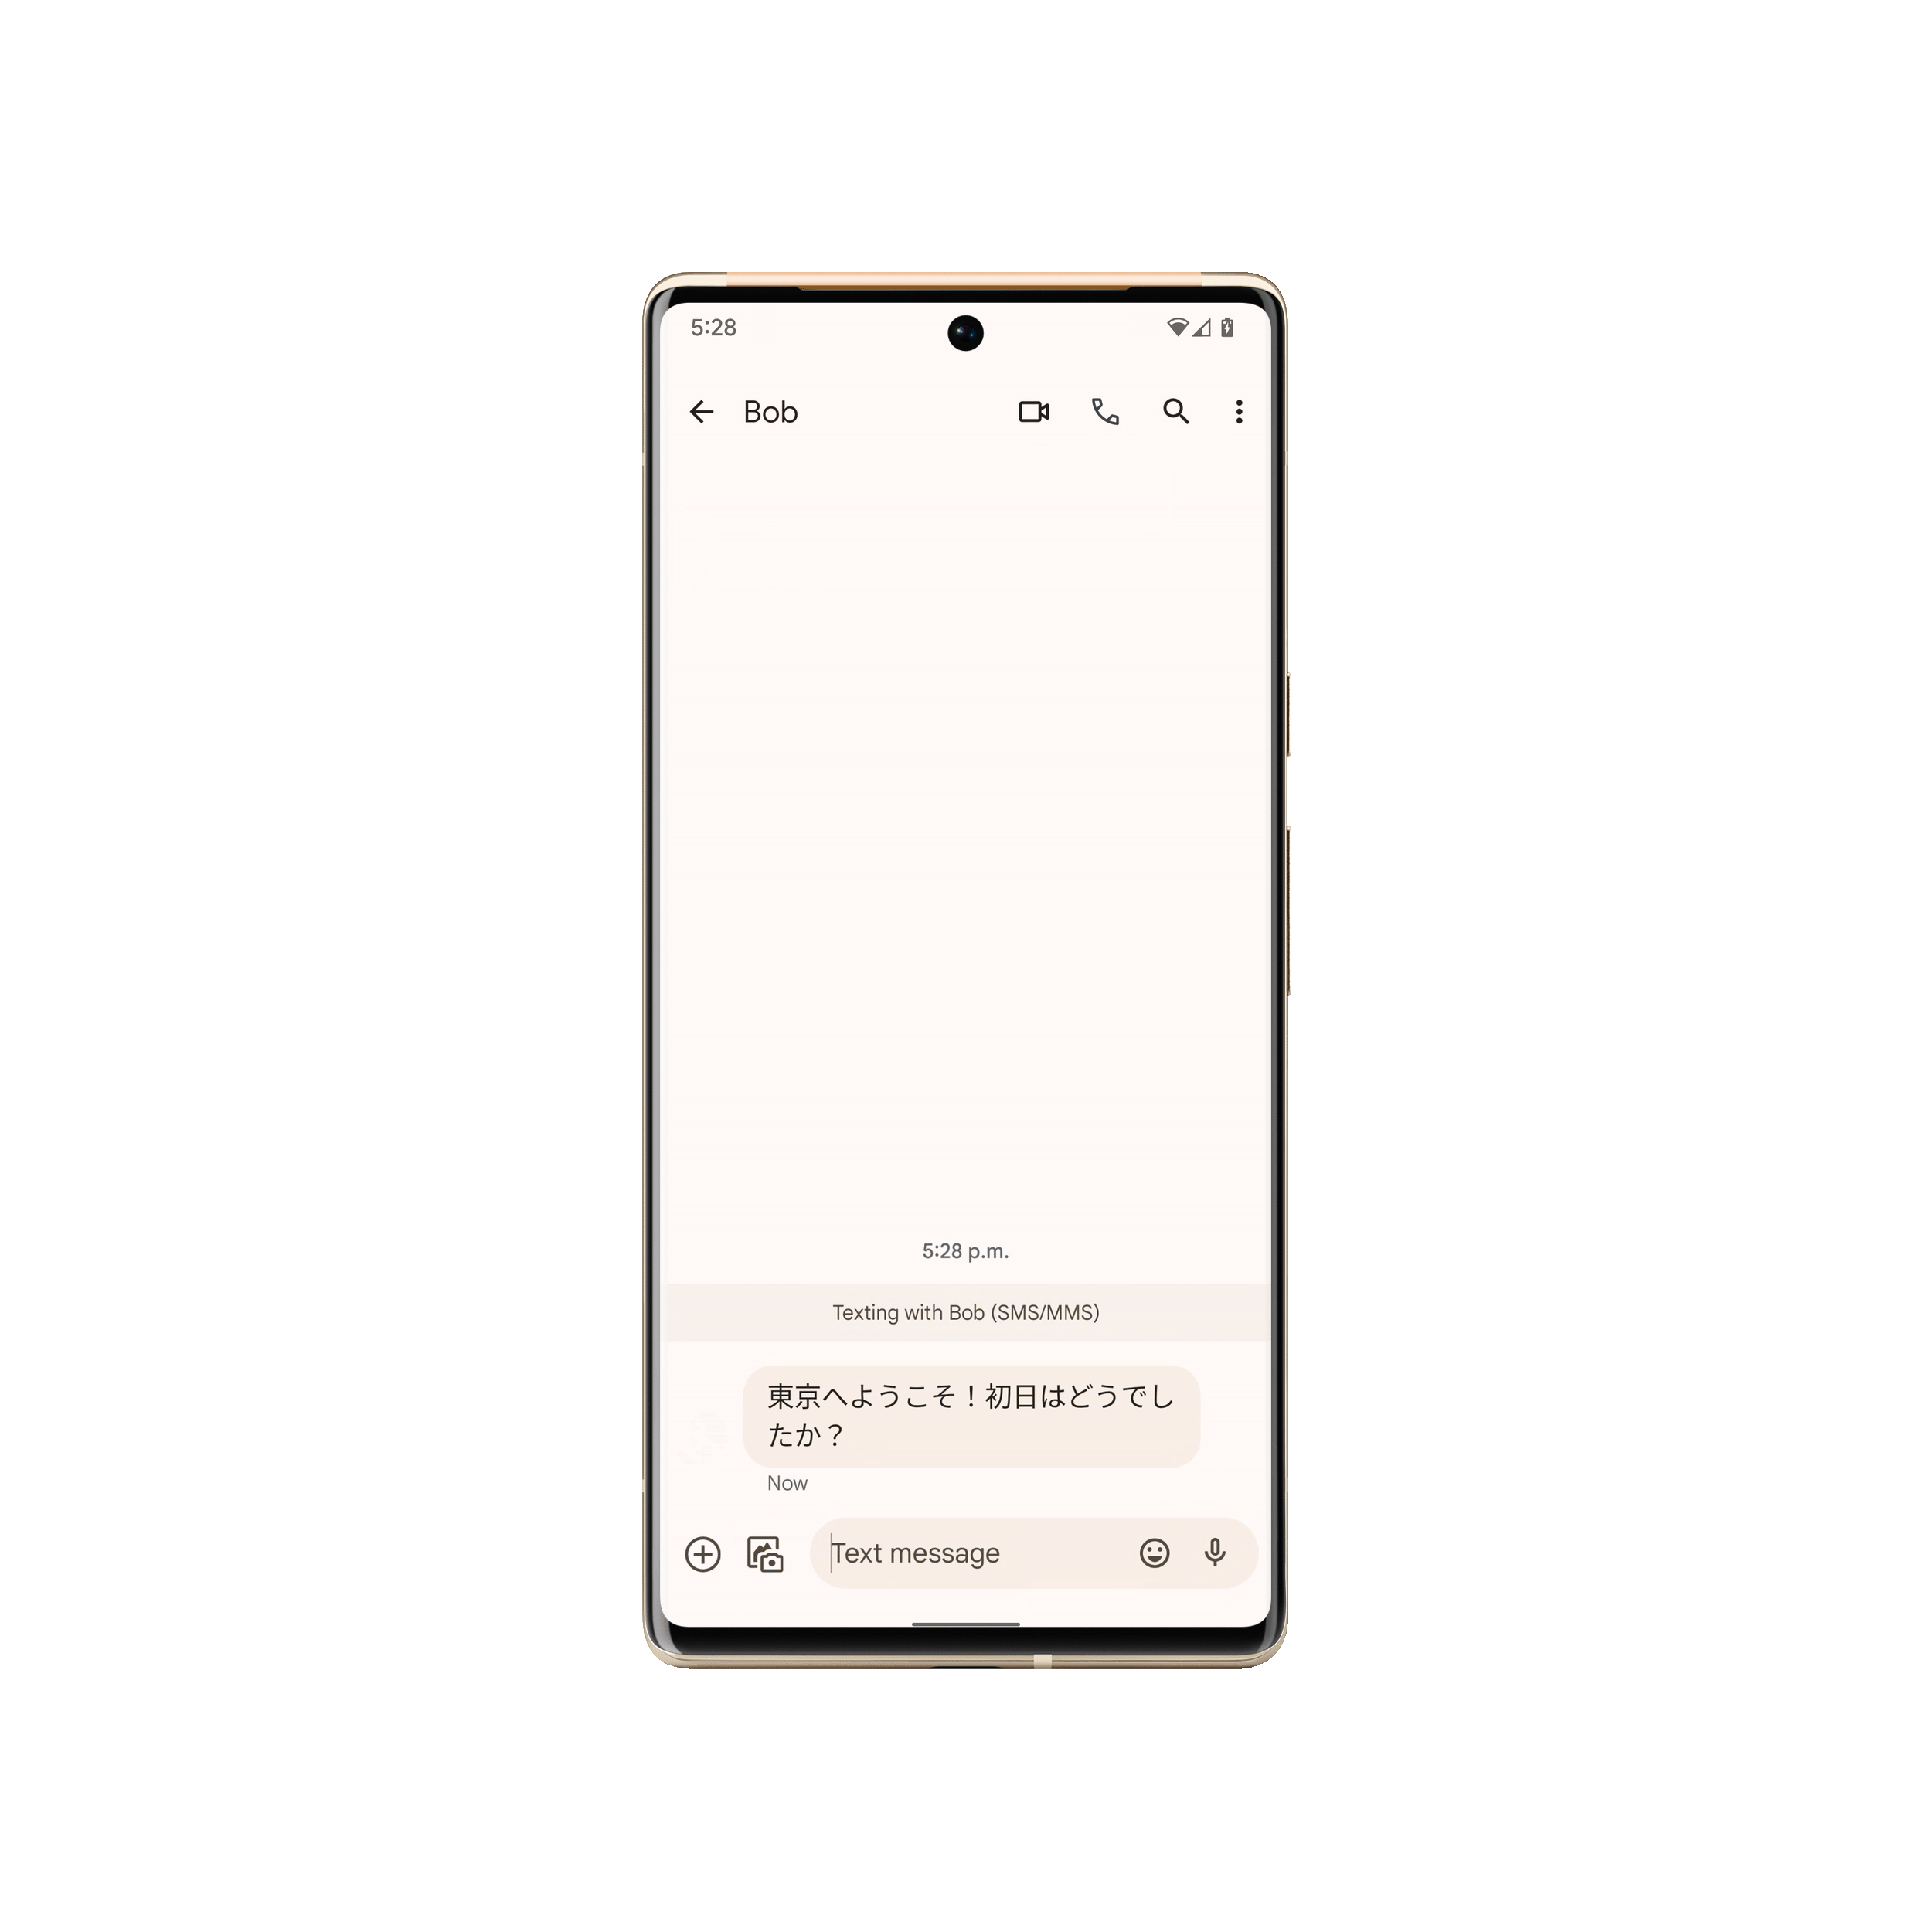 Animated GIF showing a Pixel 6 phone using interpreter mode.